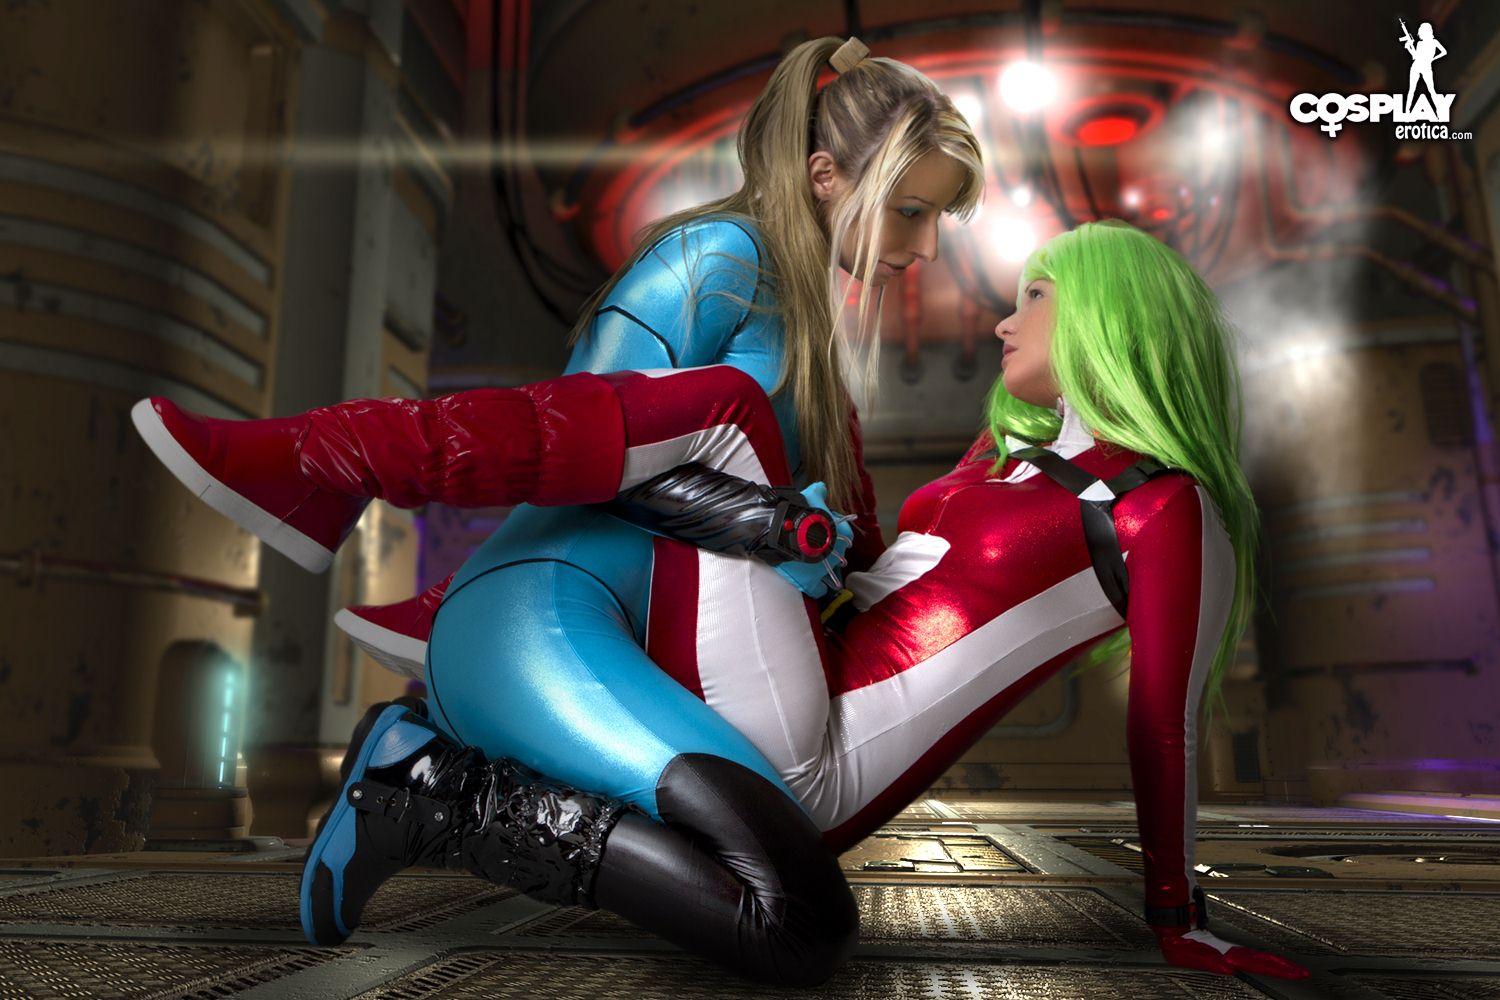 Cosplayers Sandy Bell and Ginger dress up as Metroid characters and get it on #54531237